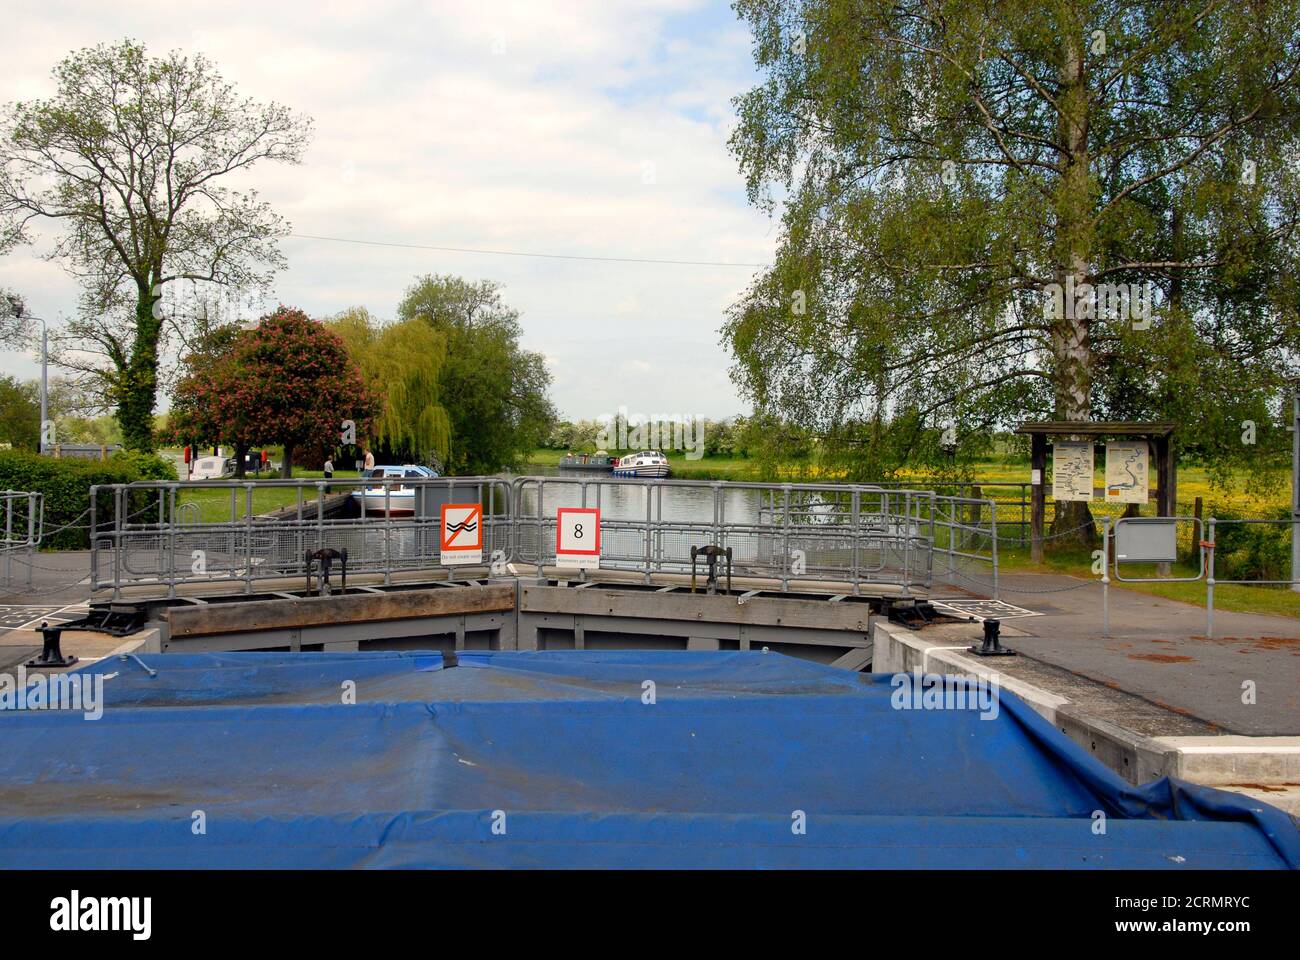 Boat in lock on River Thames, Oxfordshire, England with gates closed and showing warning signs about not creating wash and a speed limit of 8 km/h Stock Photo